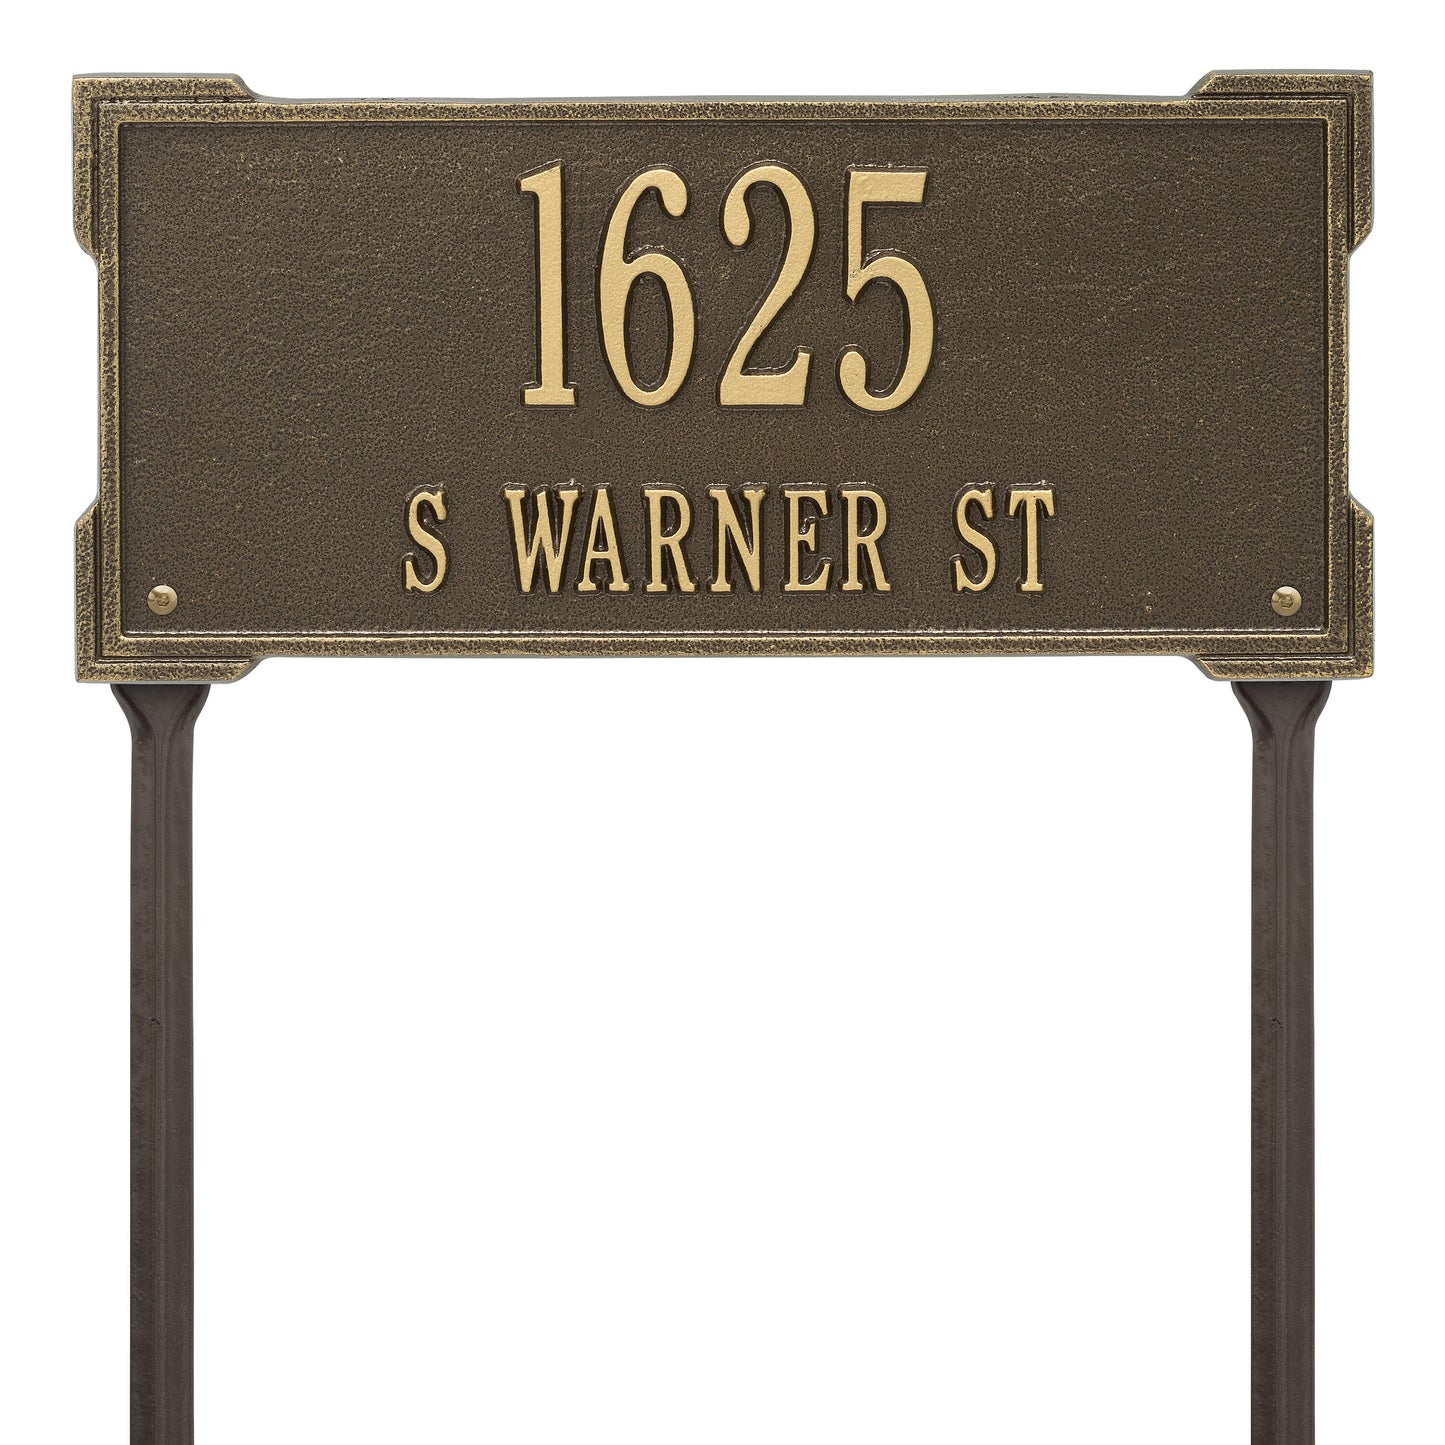 Whitehall Products Personalized Roanoke Standard Lawn Plaque Two Lines Antique Copper